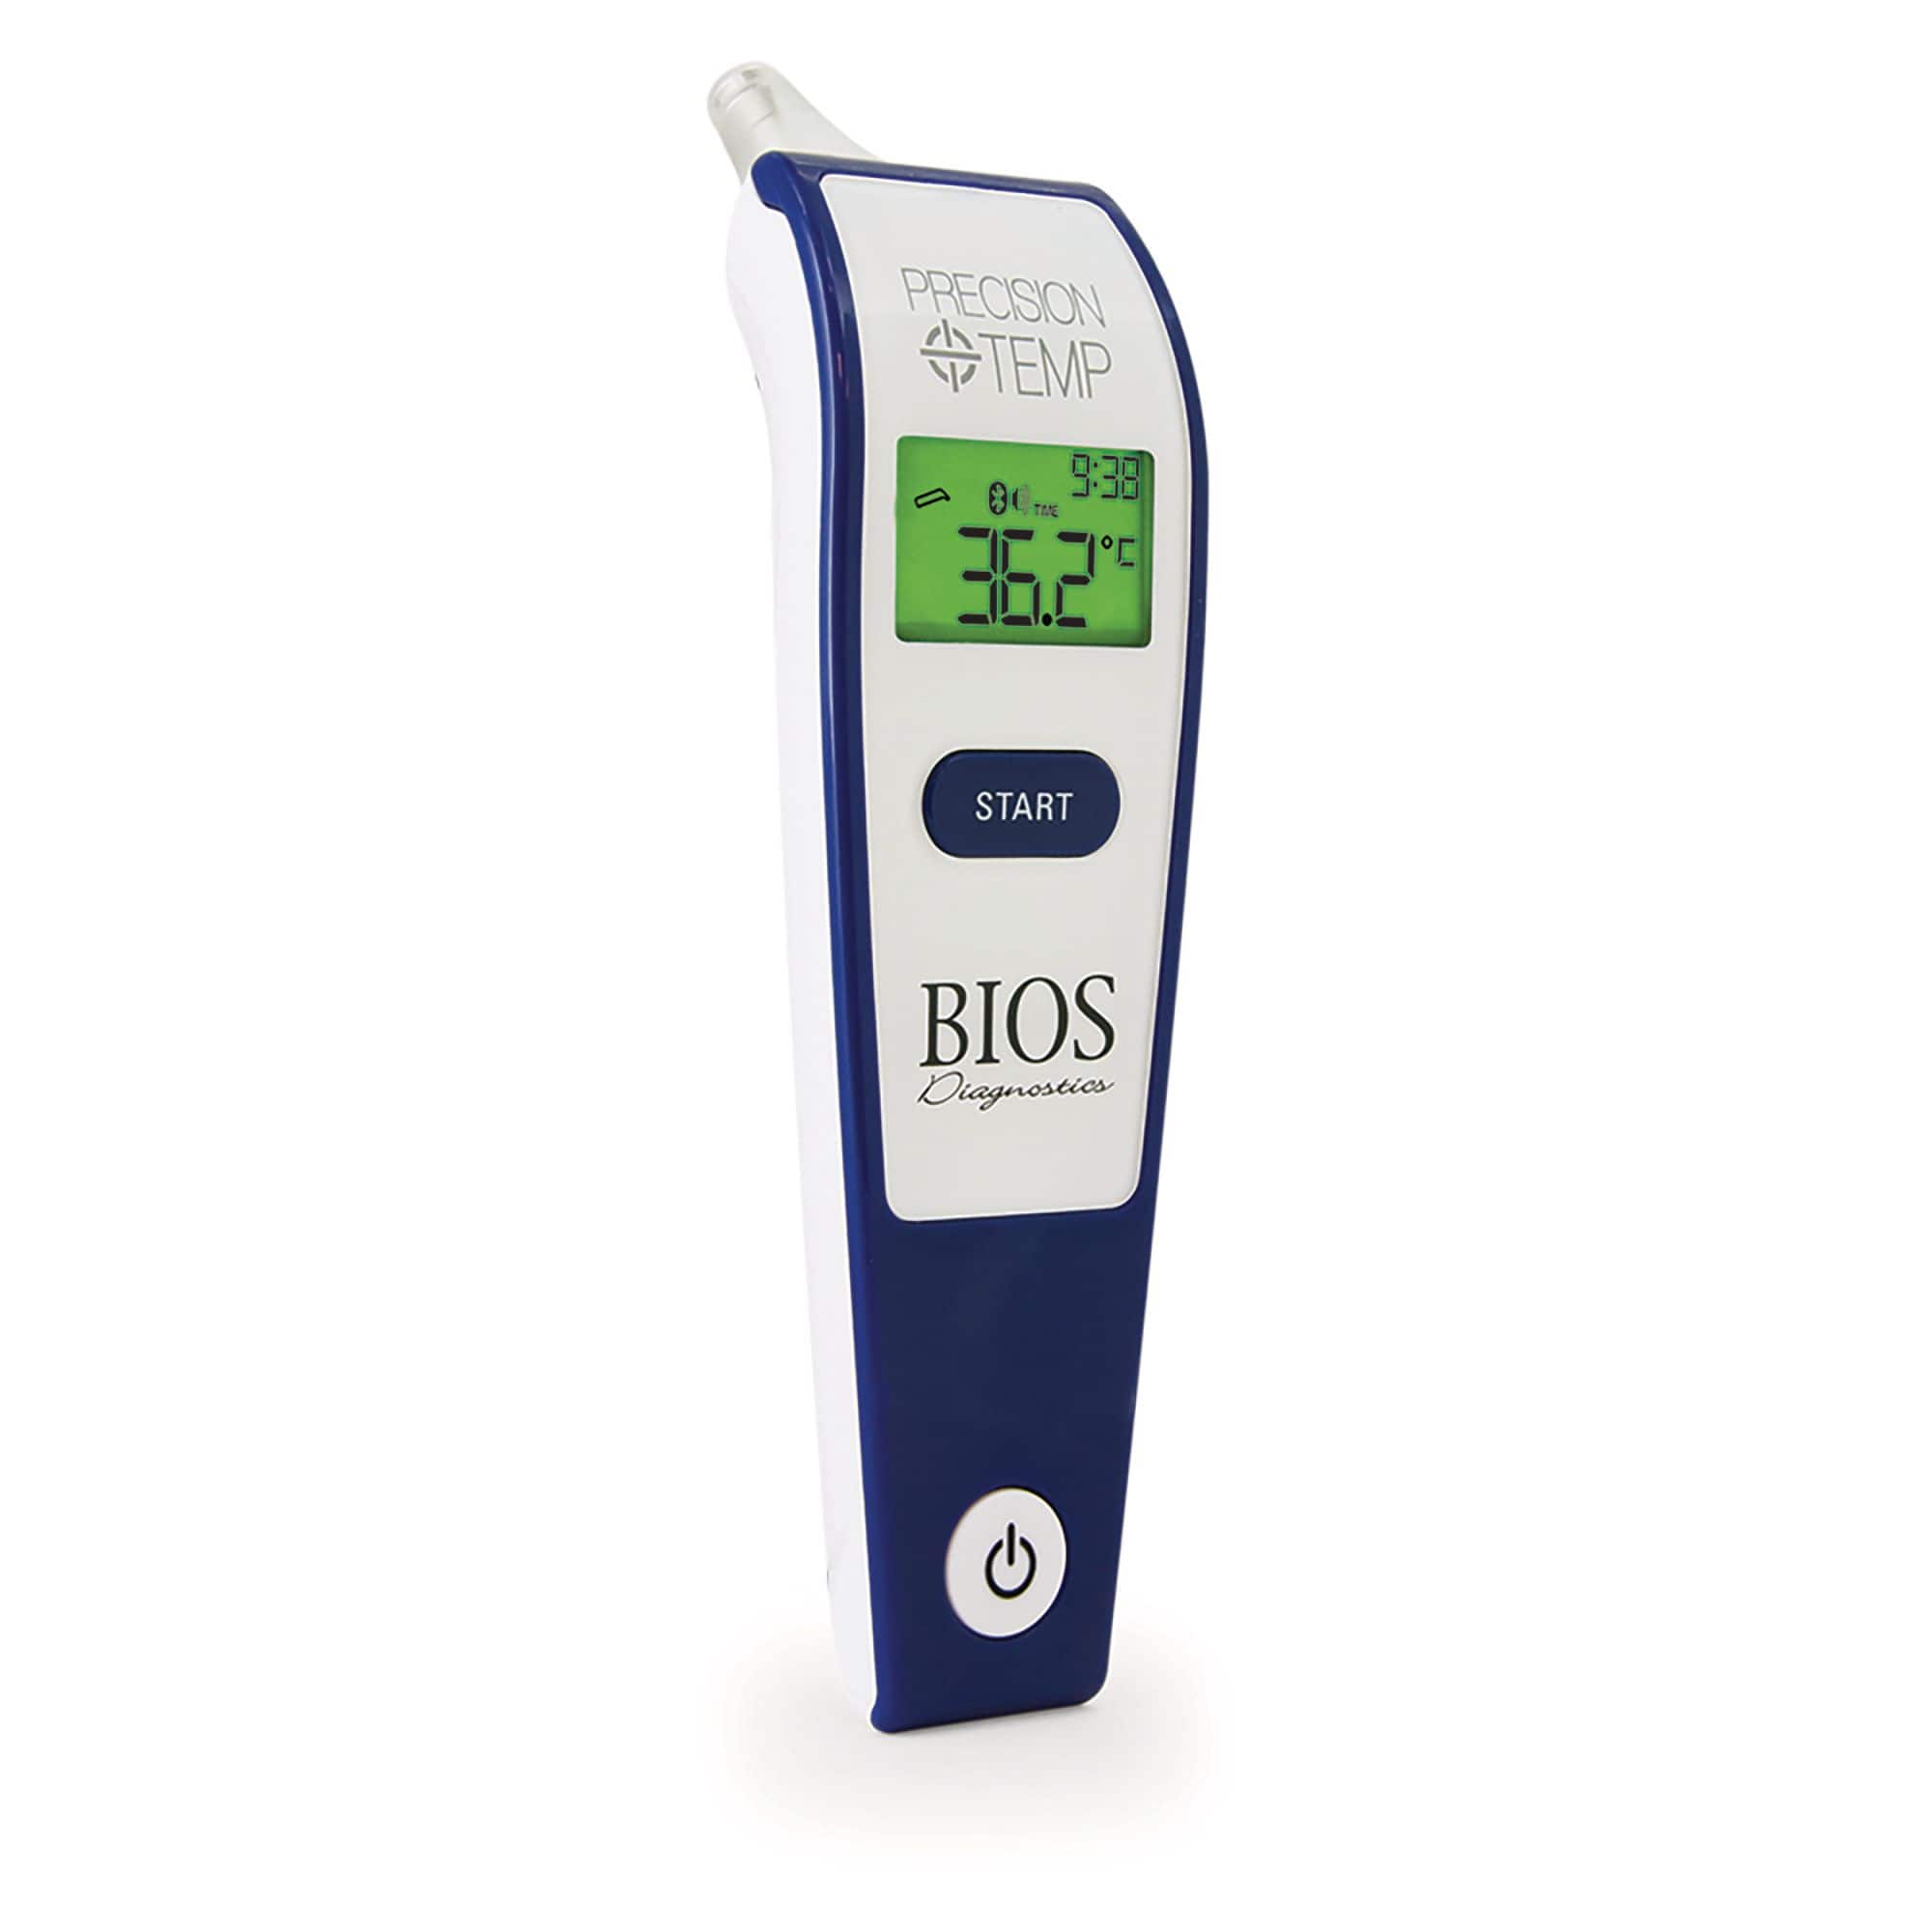 https://media-www.canadiantire.ca/product/living/personal-garment-care/personal-care/3744513/bios-ear-thermometer-with-bluetooth-f46254cb-da97-4577-9a80-0009e7c3dce5-jpgrendition.jpg